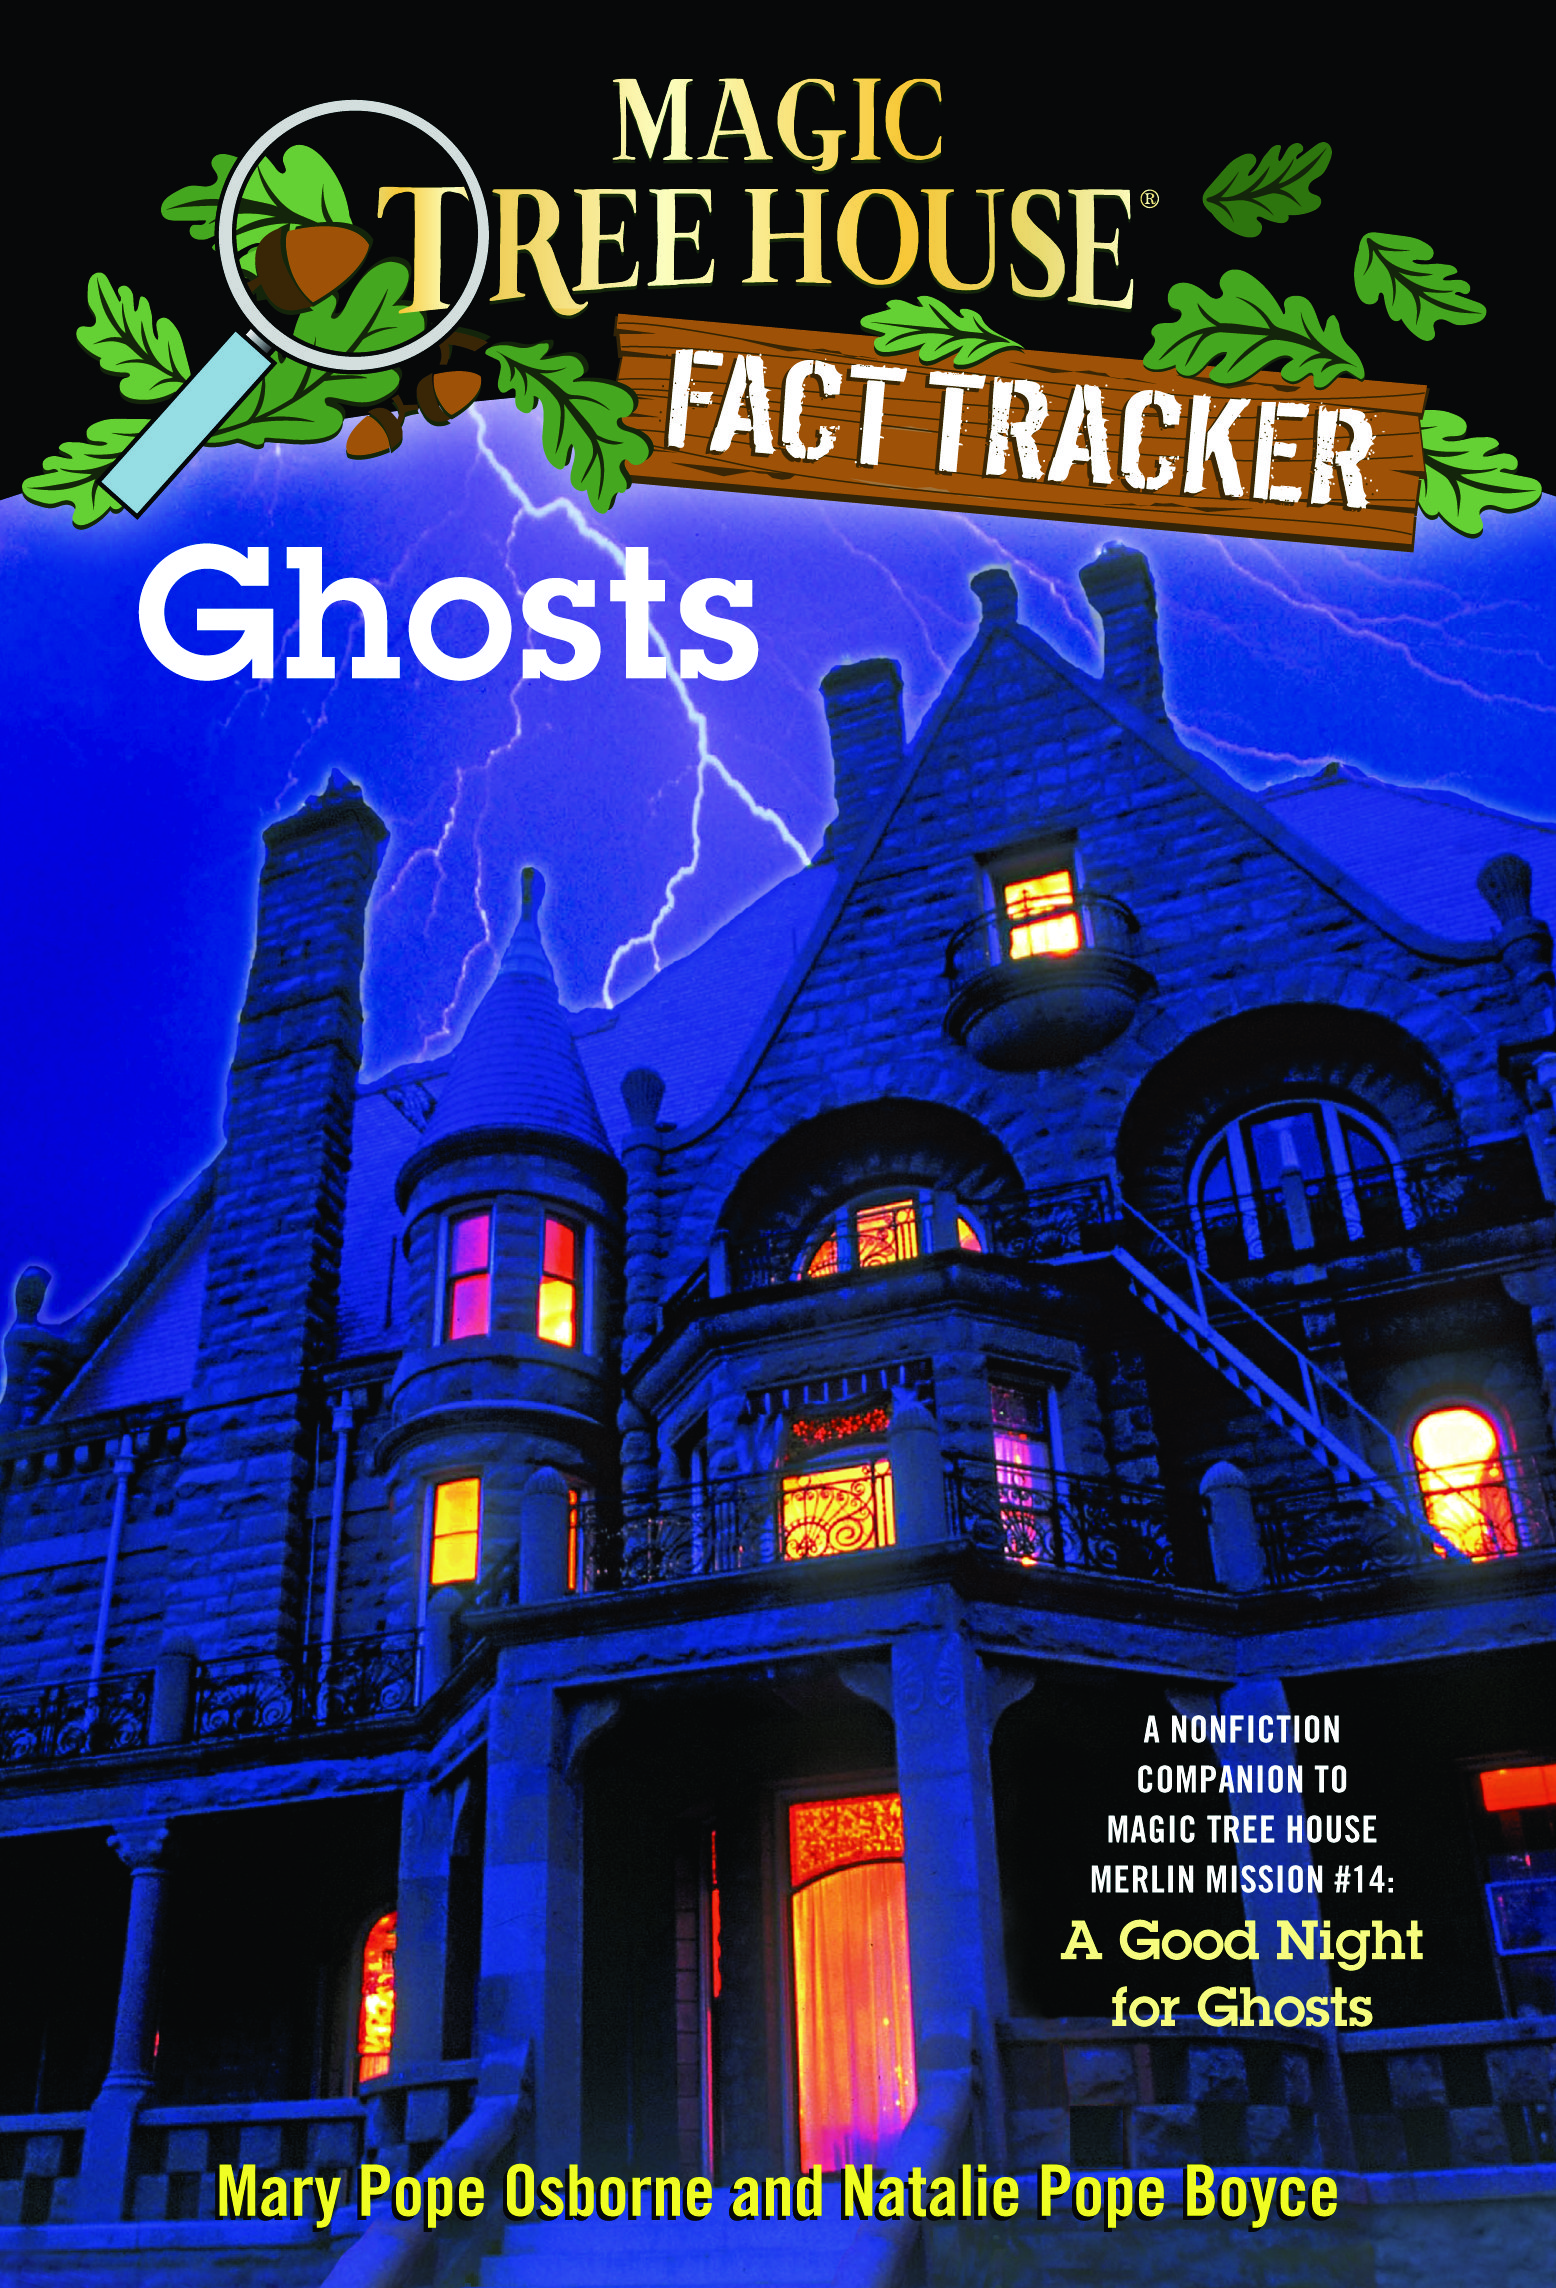 Magic Tree House Fact Tracker #20 Ghosts